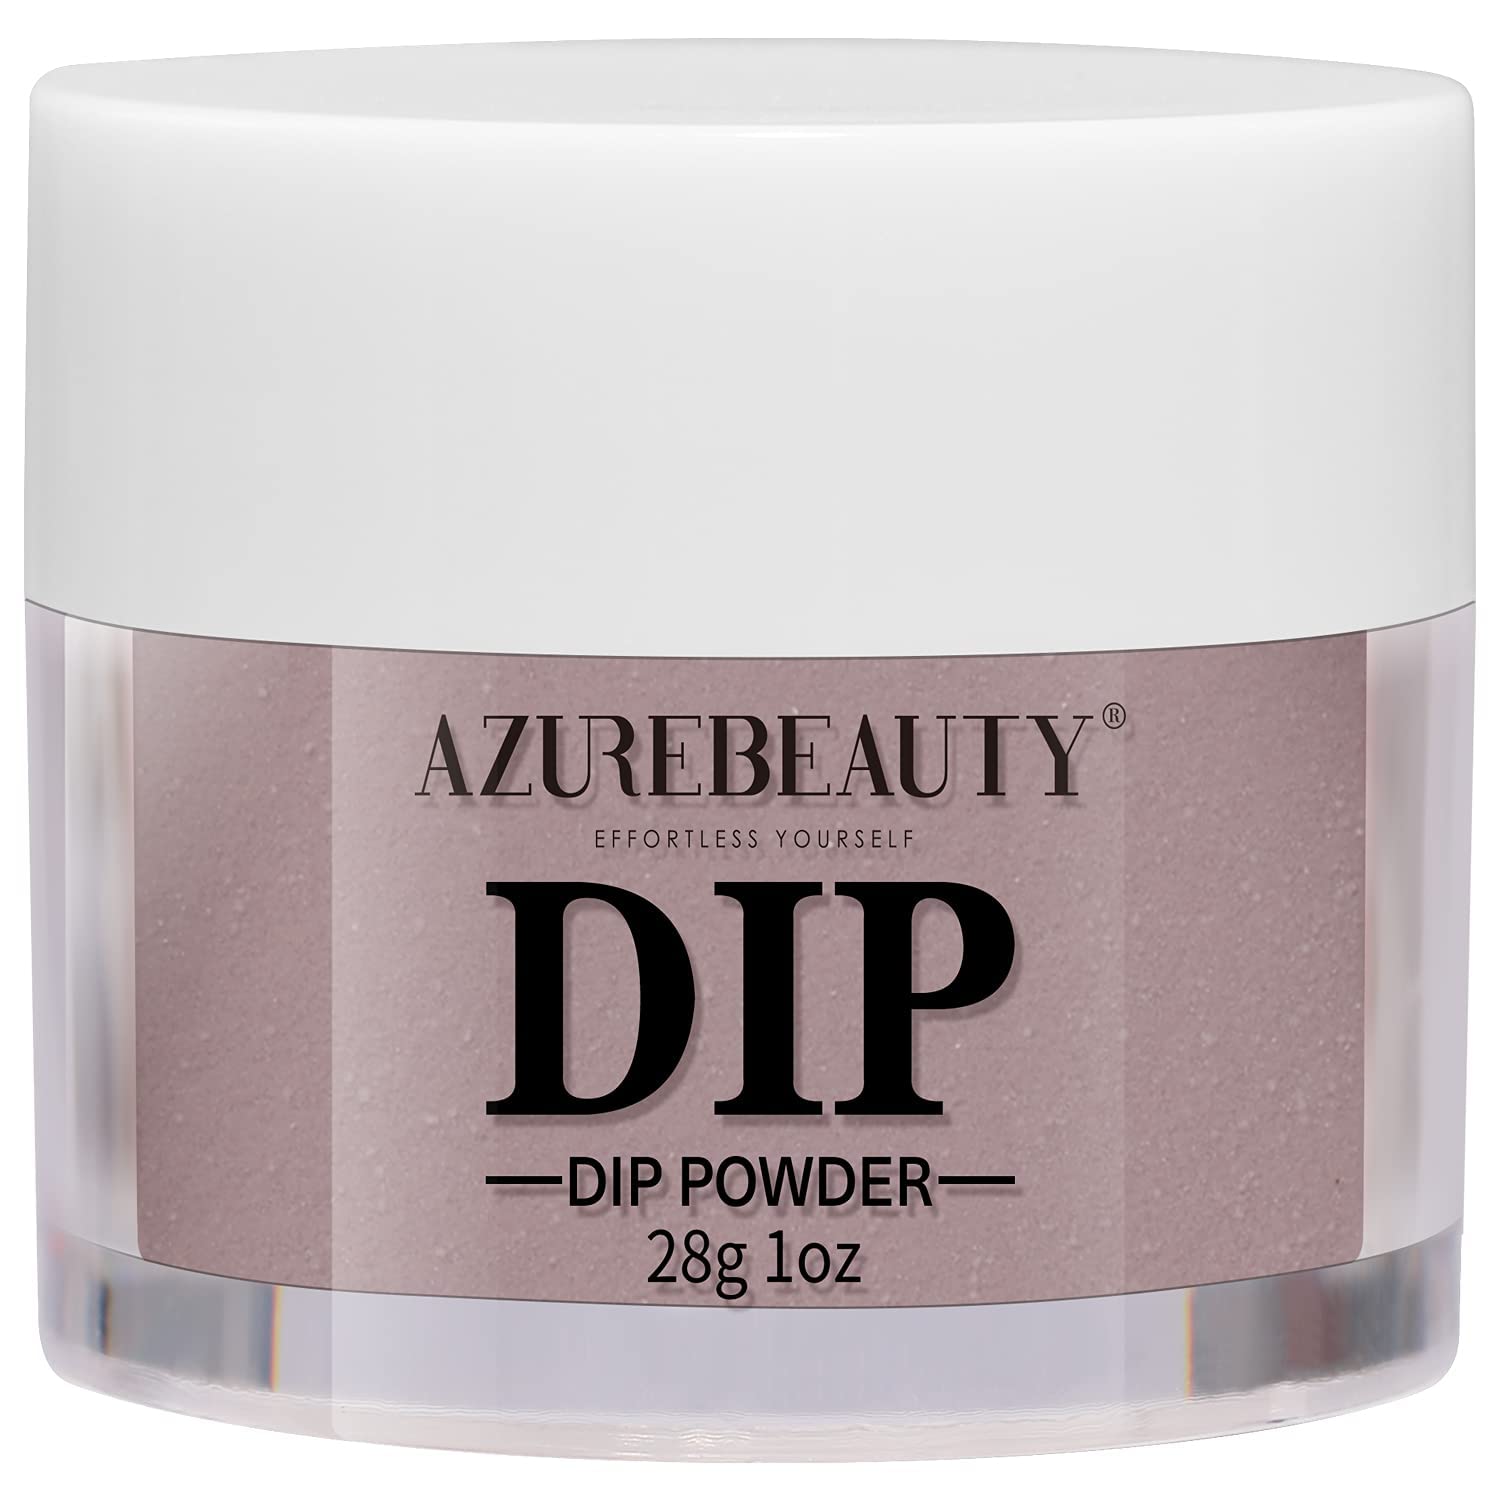 AZUREBEAUTY Dip Powder Nude Brown Color, Nail Dipping Powder French Nail Art Starter Manicure Salon DIY at Home, Odor-Free and L